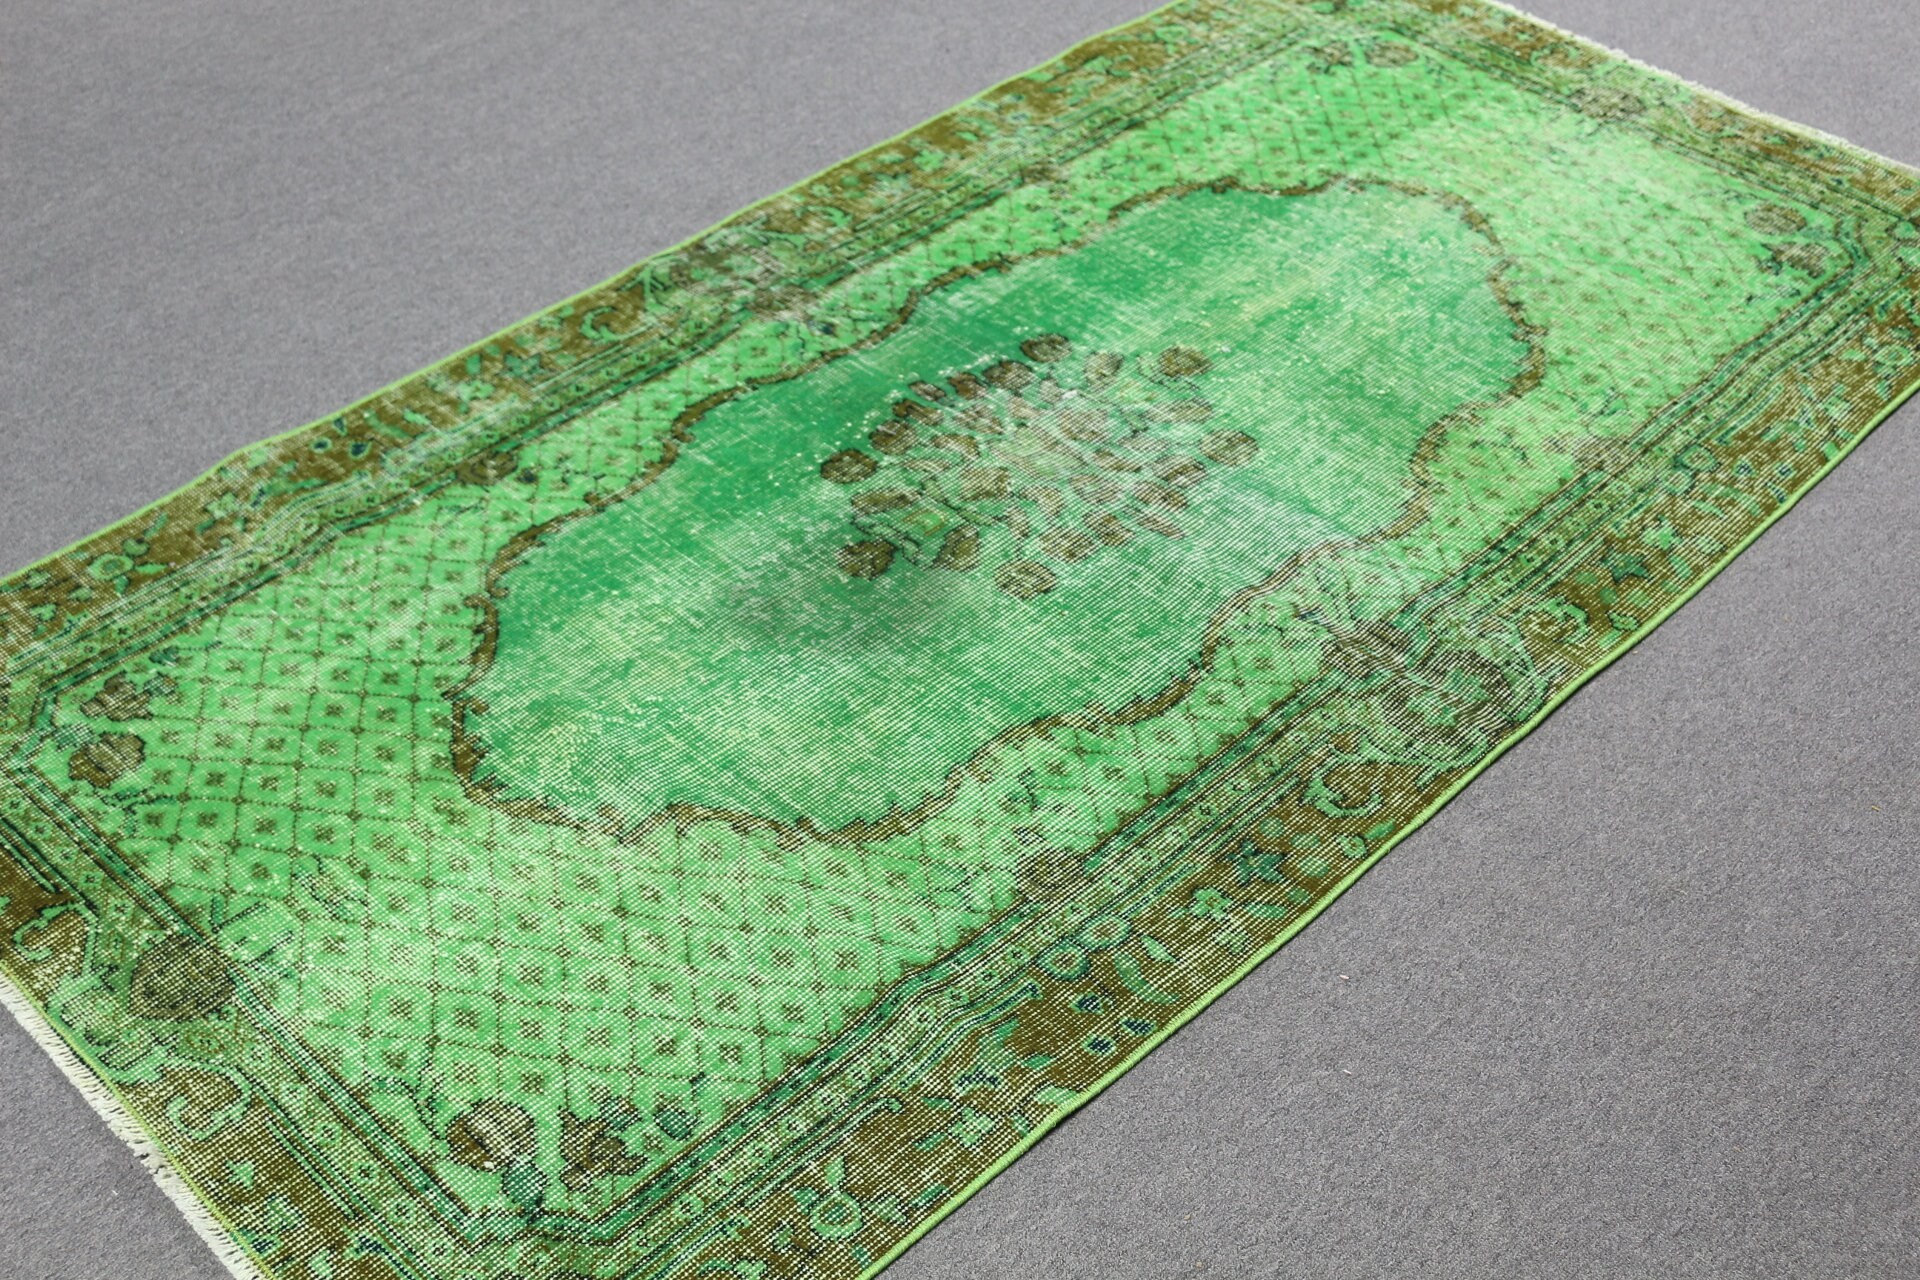 3.5x6.7 ft Accent Rug, Nursery Rug, Moroccan Rug, Kitchen Rug, Wool Rugs, Vintage Rug, Turkish Rugs, Green Antique Rug, Rugs for Kitchen